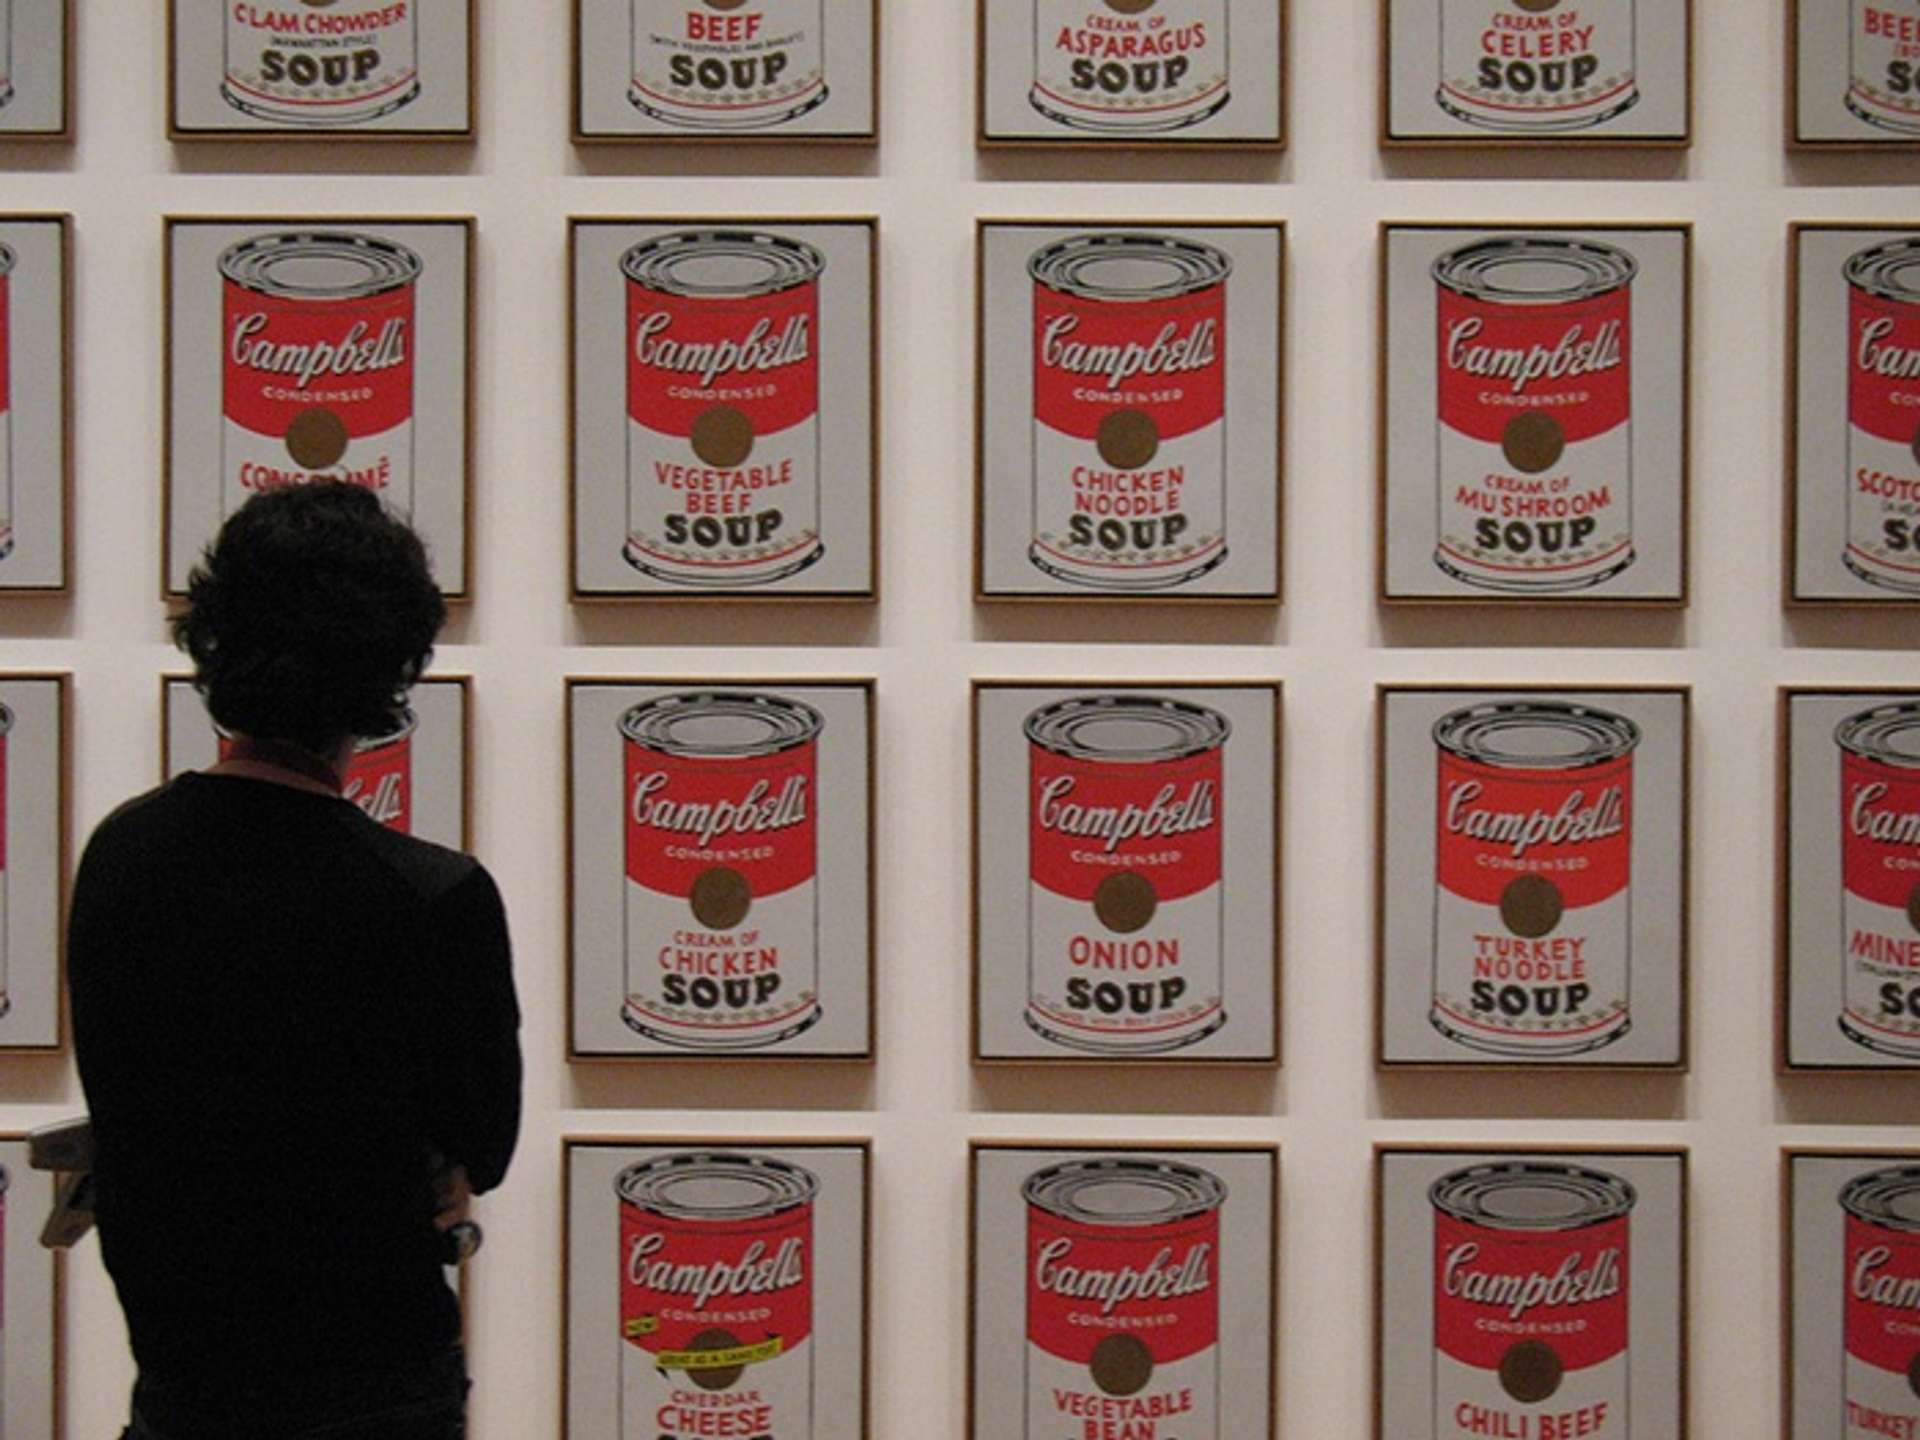 Warhol’s Campbell’s Soup Canvases by Andy Warhol - MyArtBroker